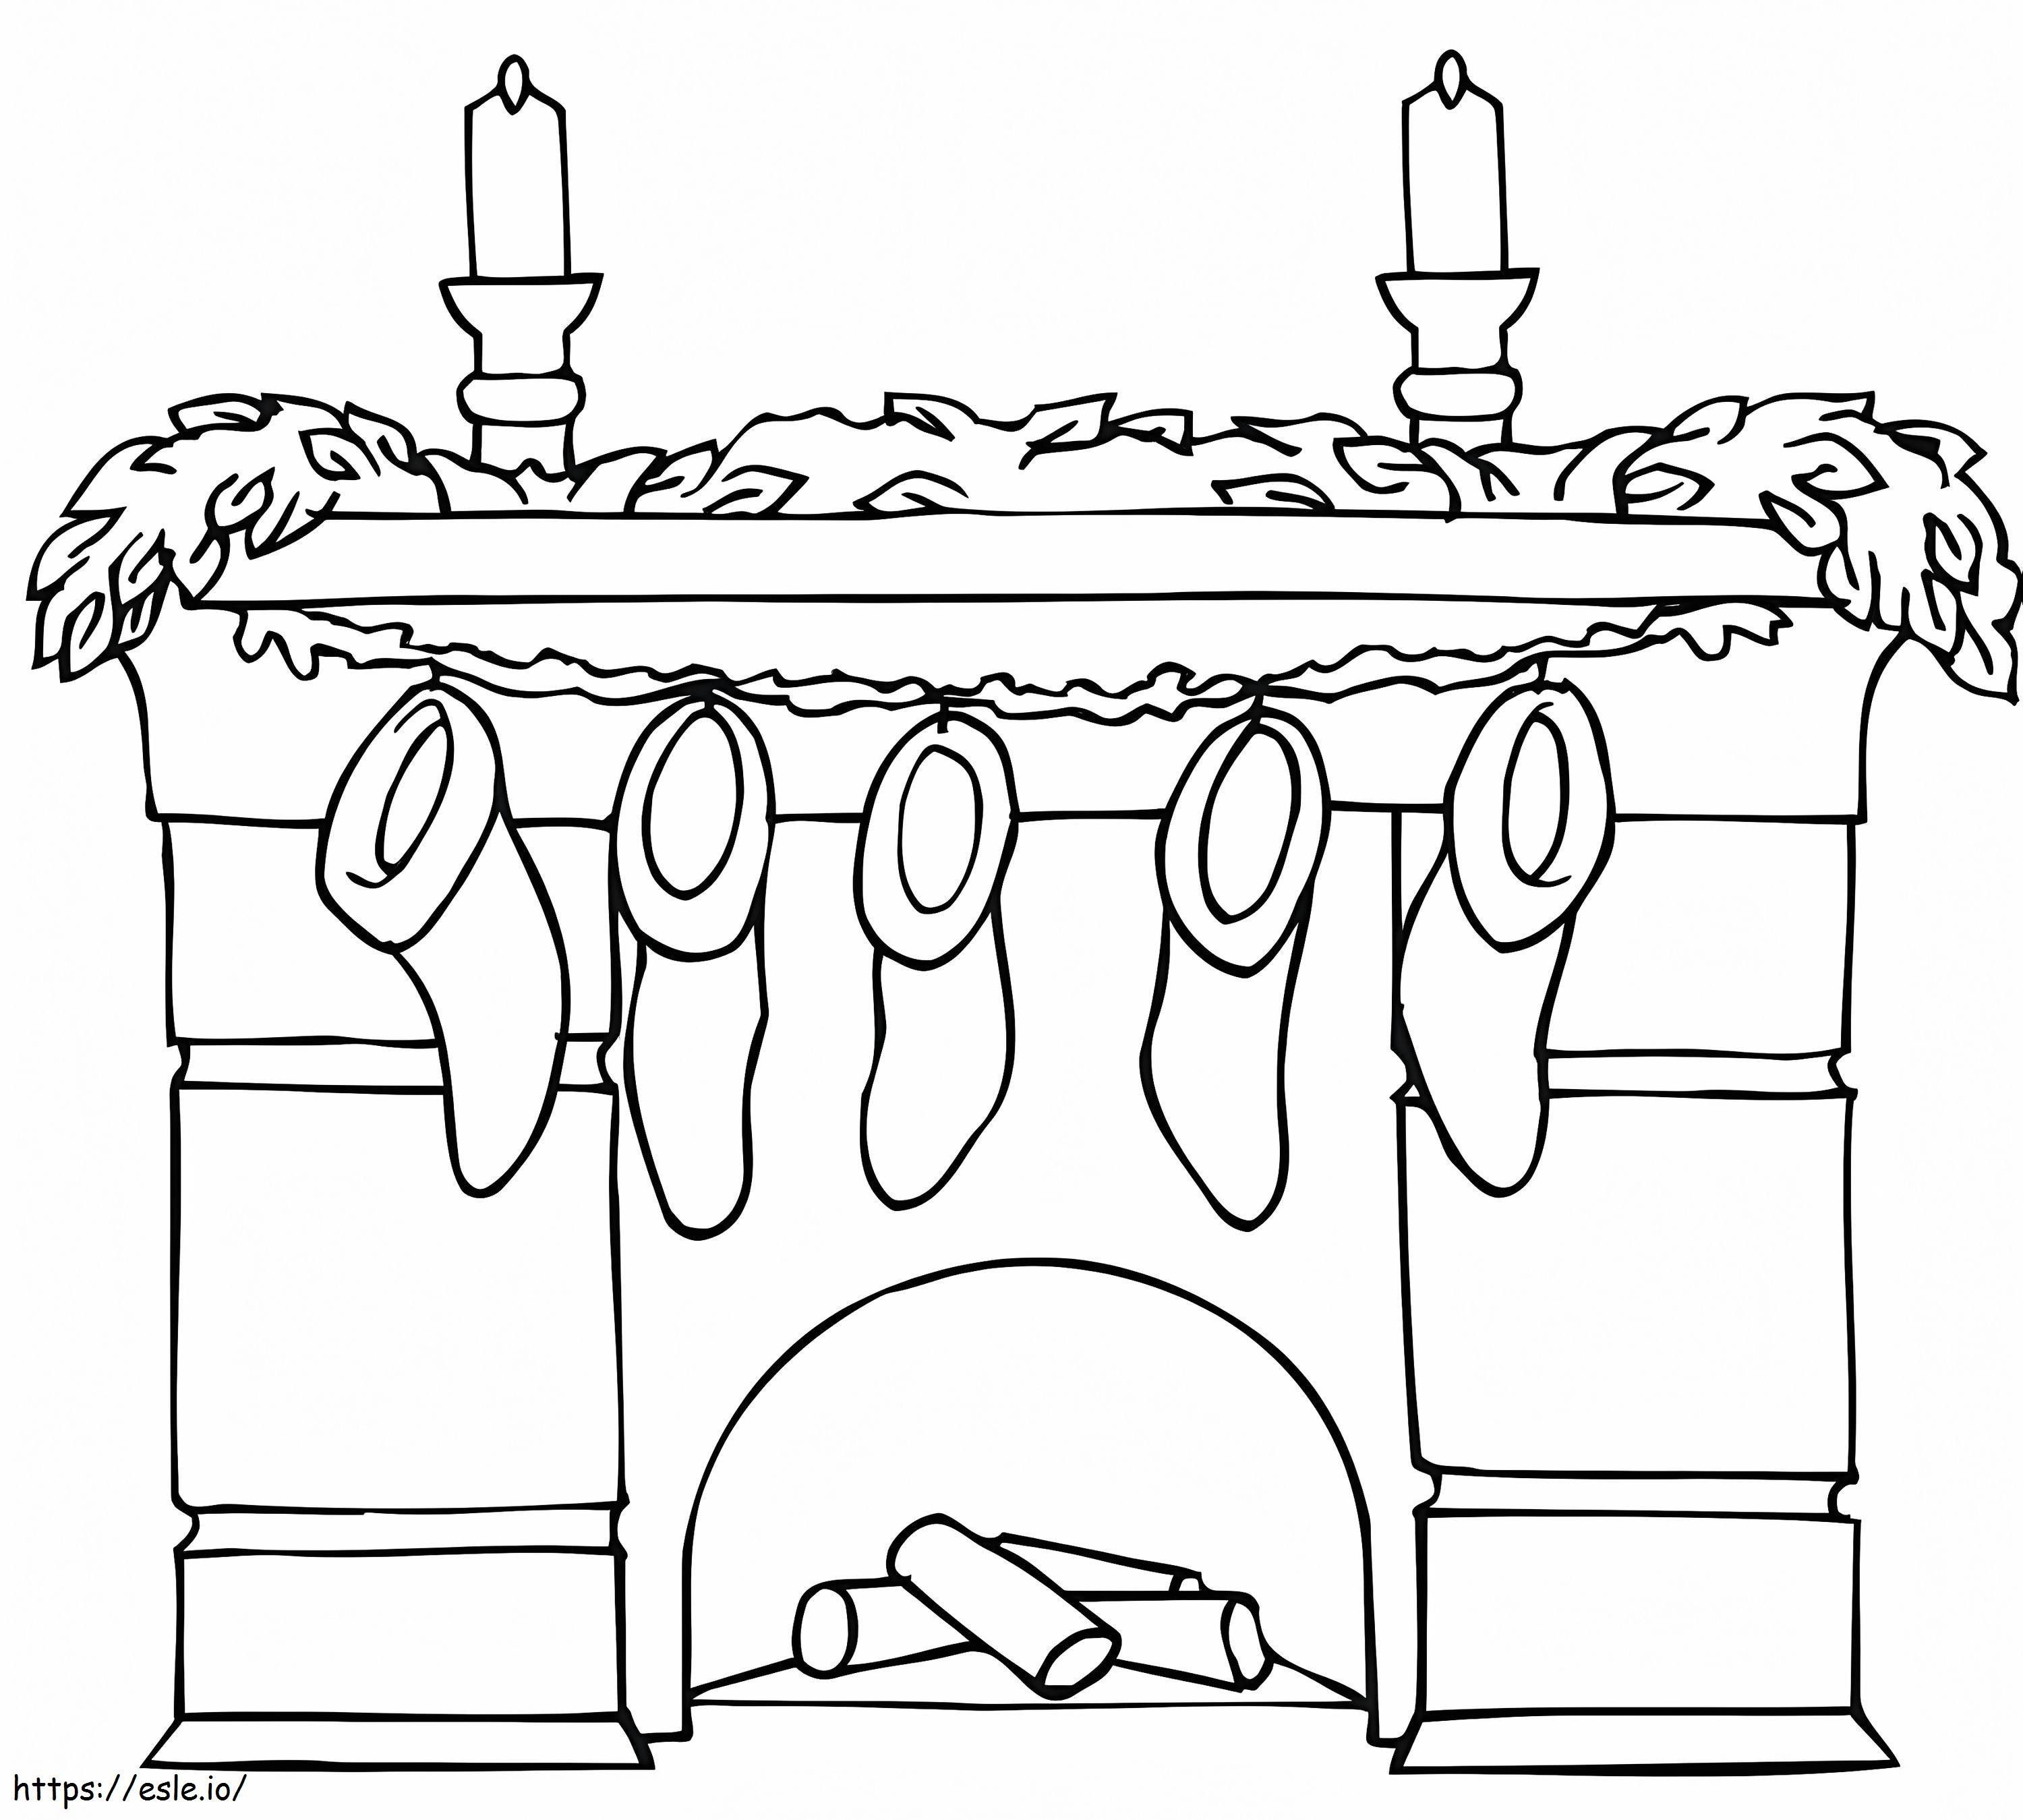 Fireplace And Stocking coloring page